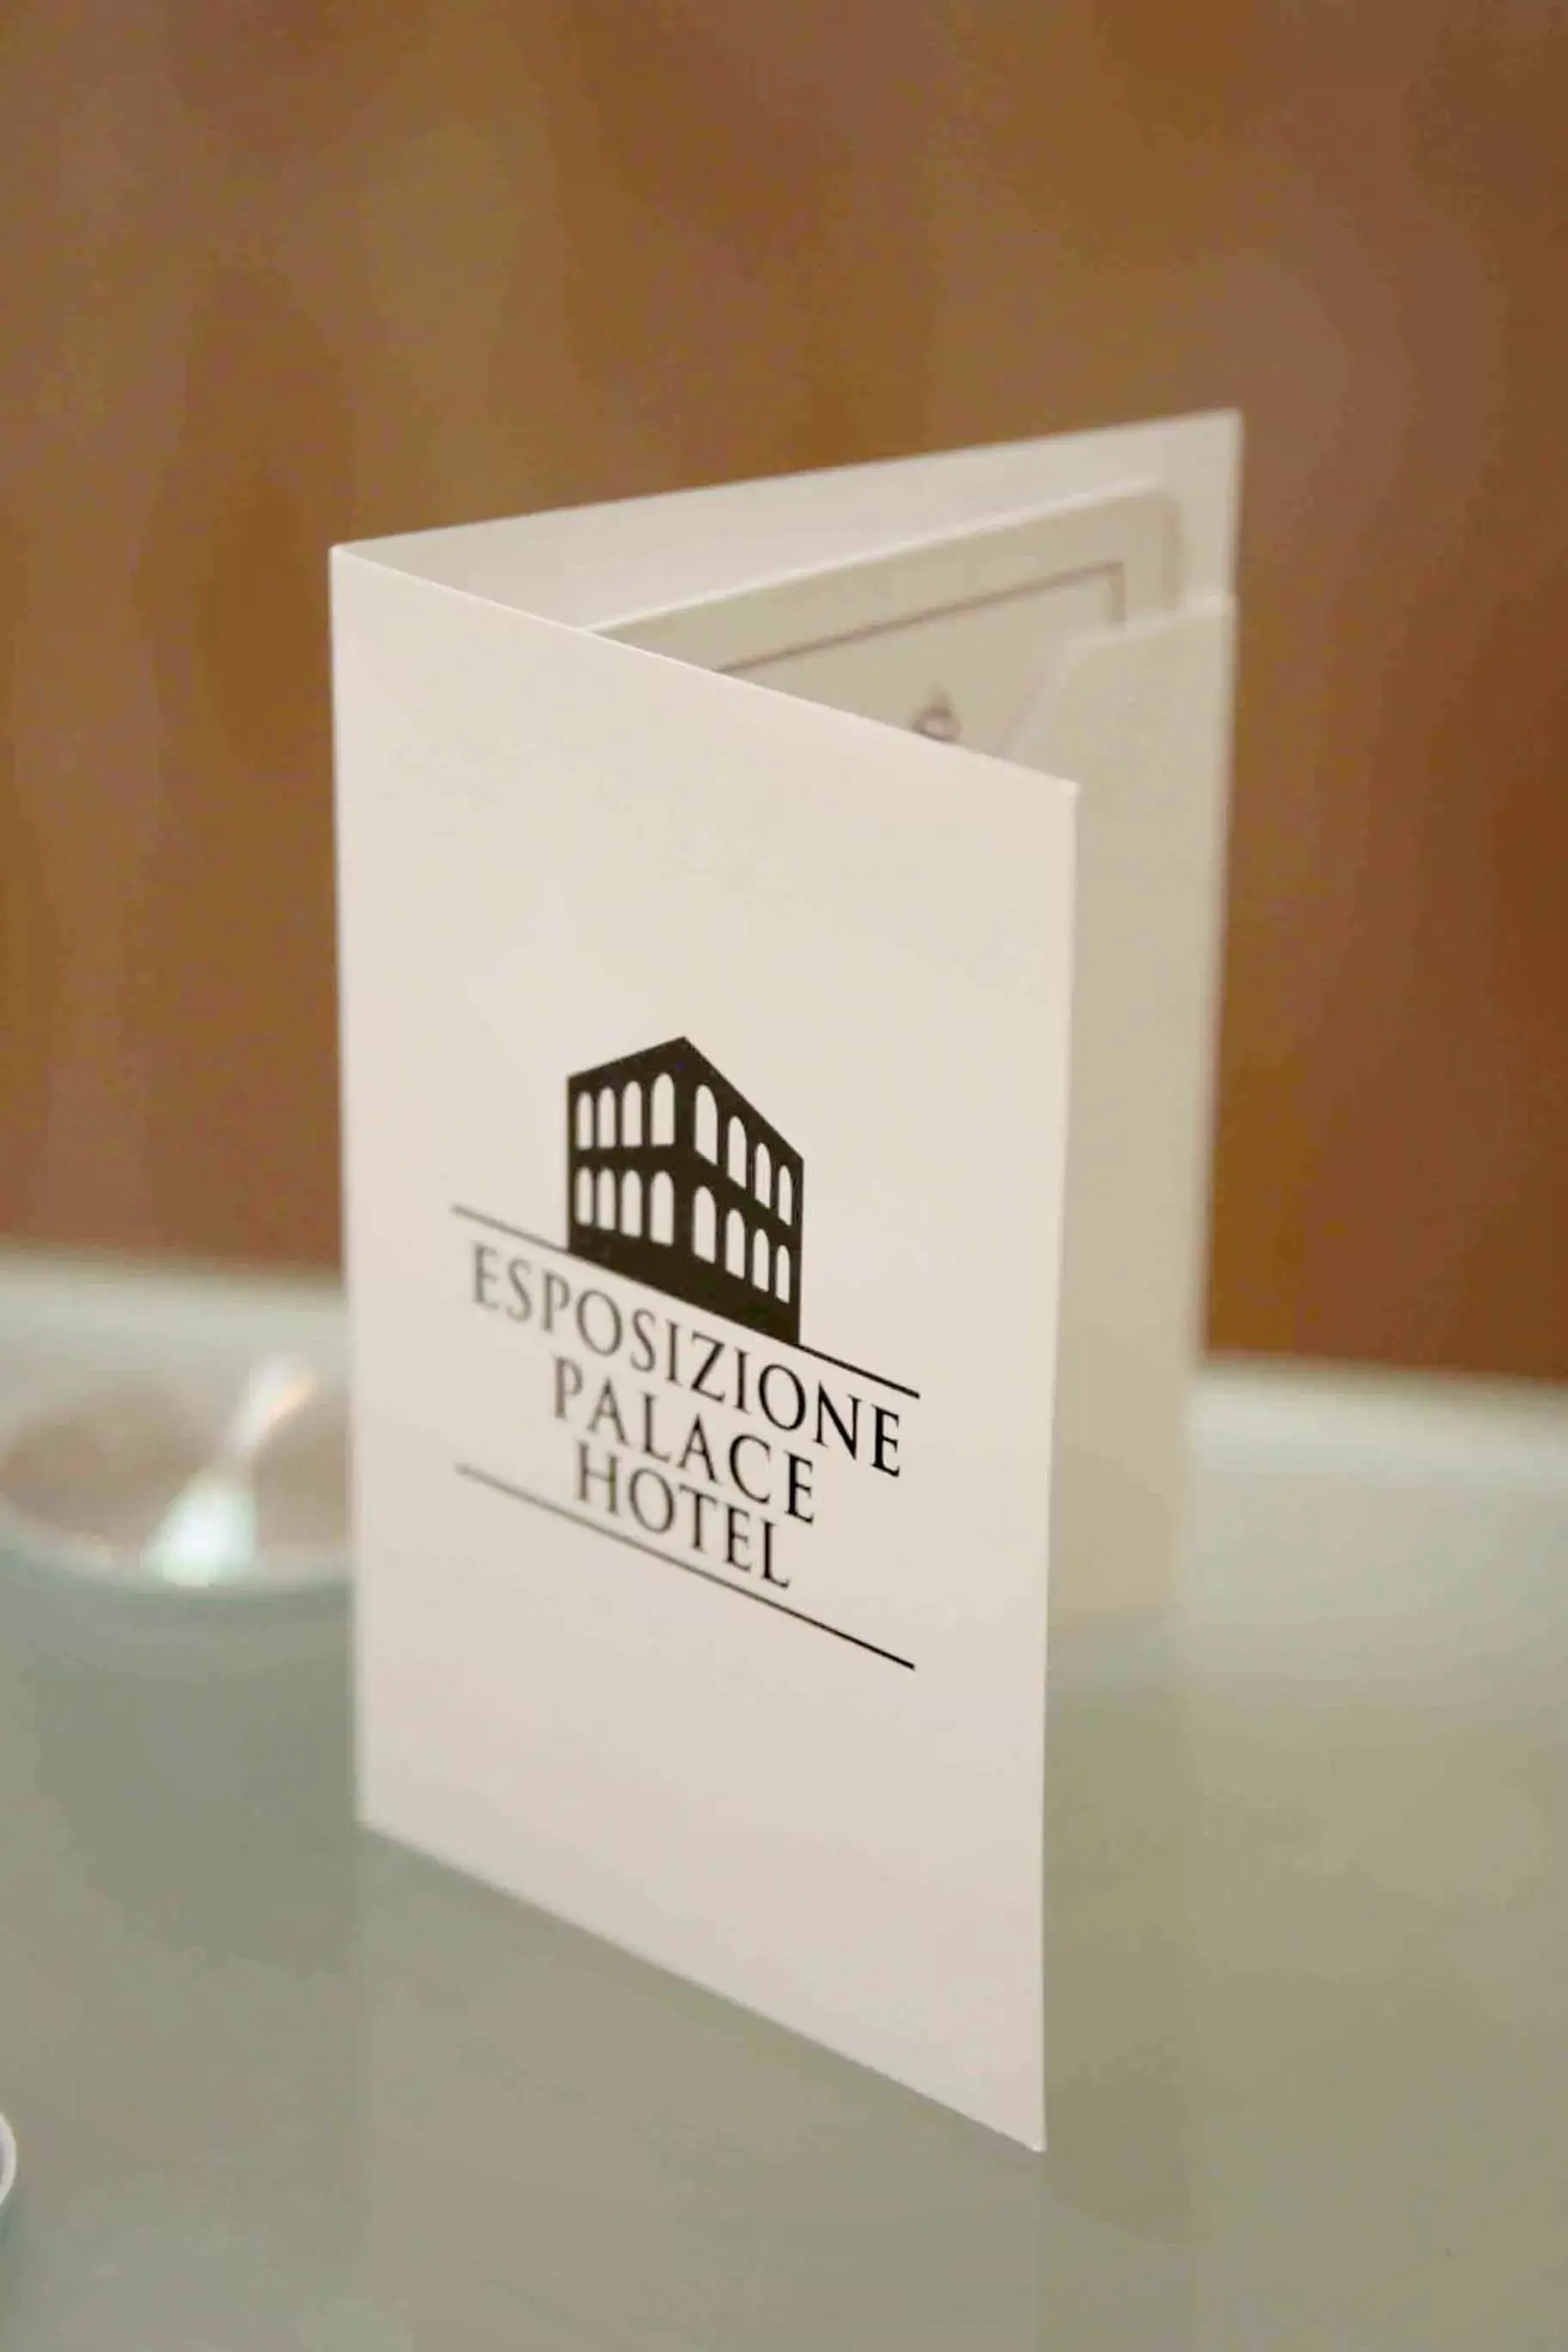 Property logo or sign in Esposizione Palace Hotel